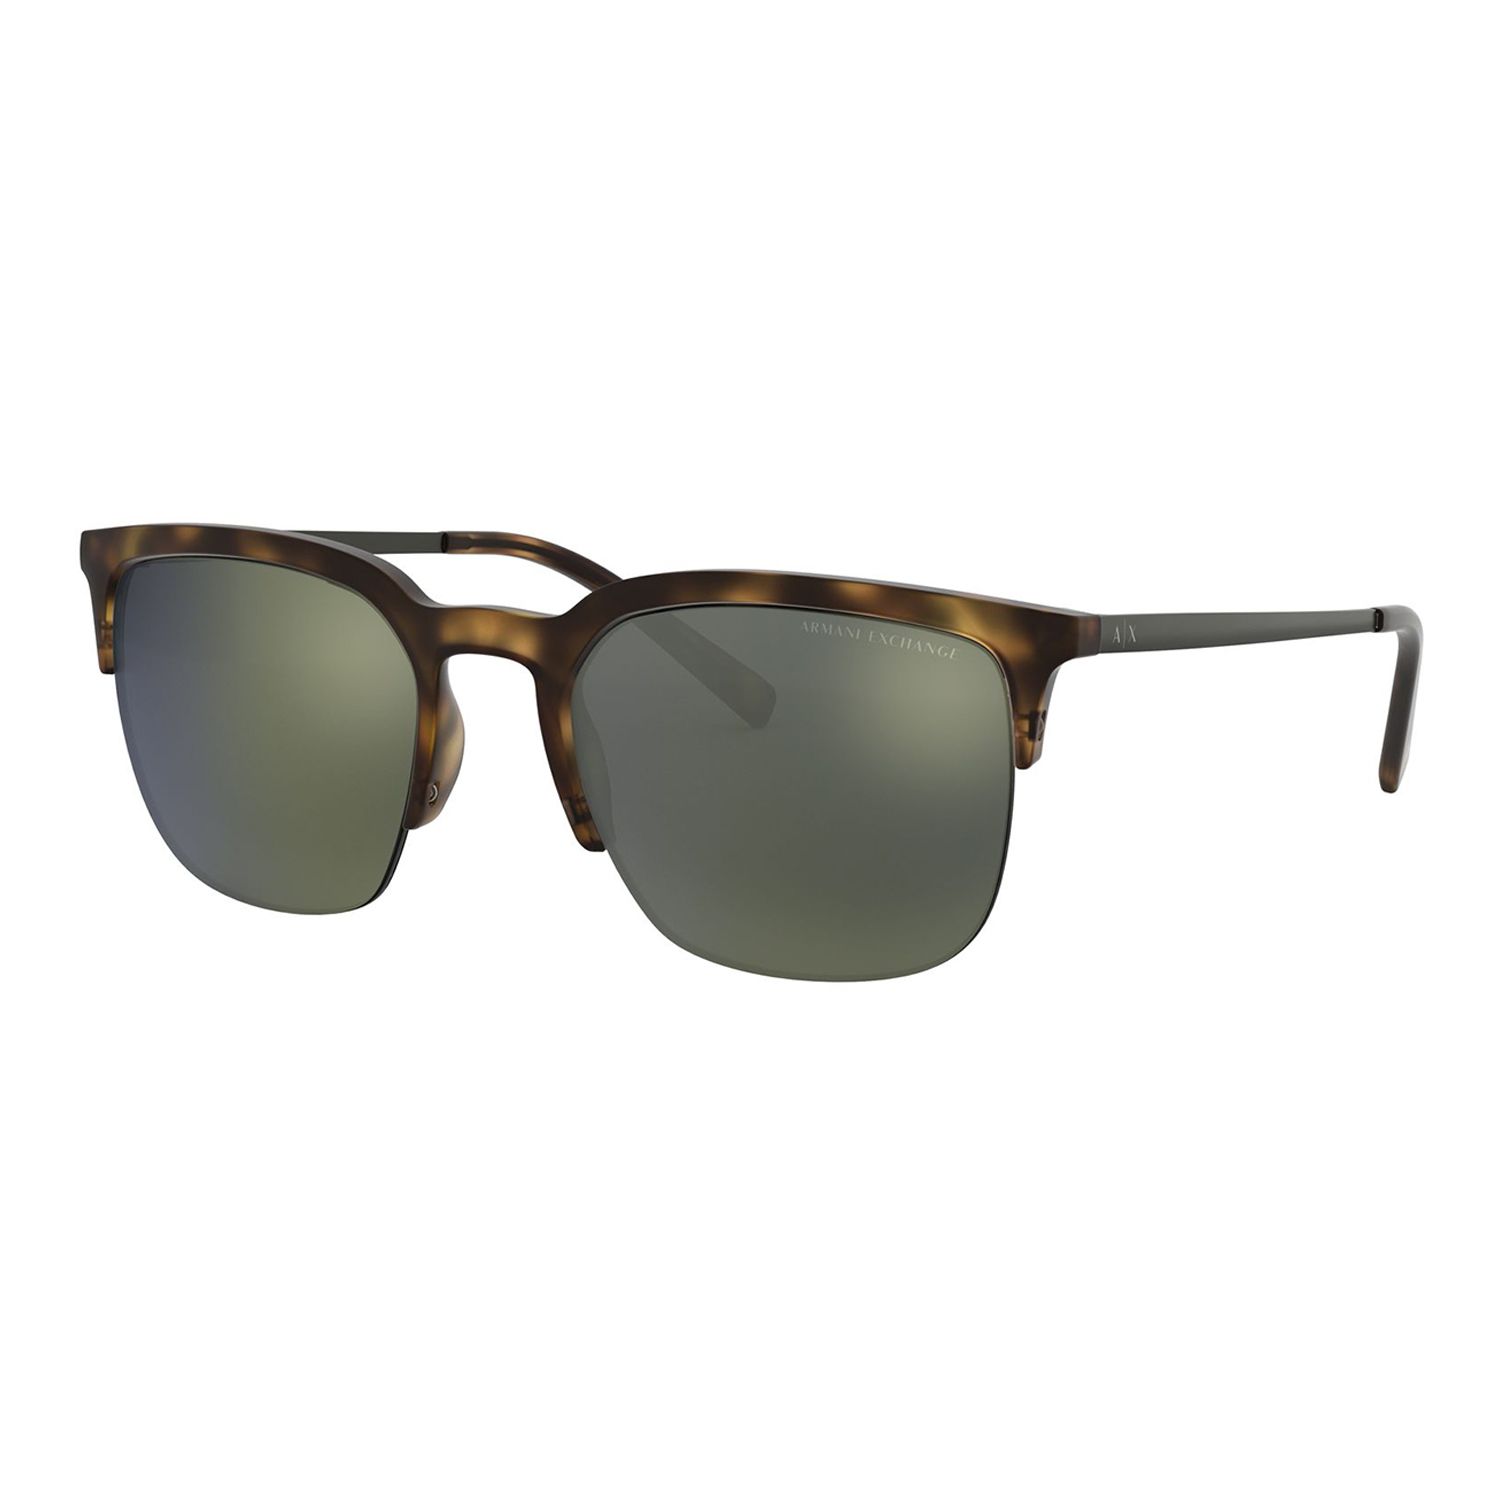 armani exchange forever young sunglasses